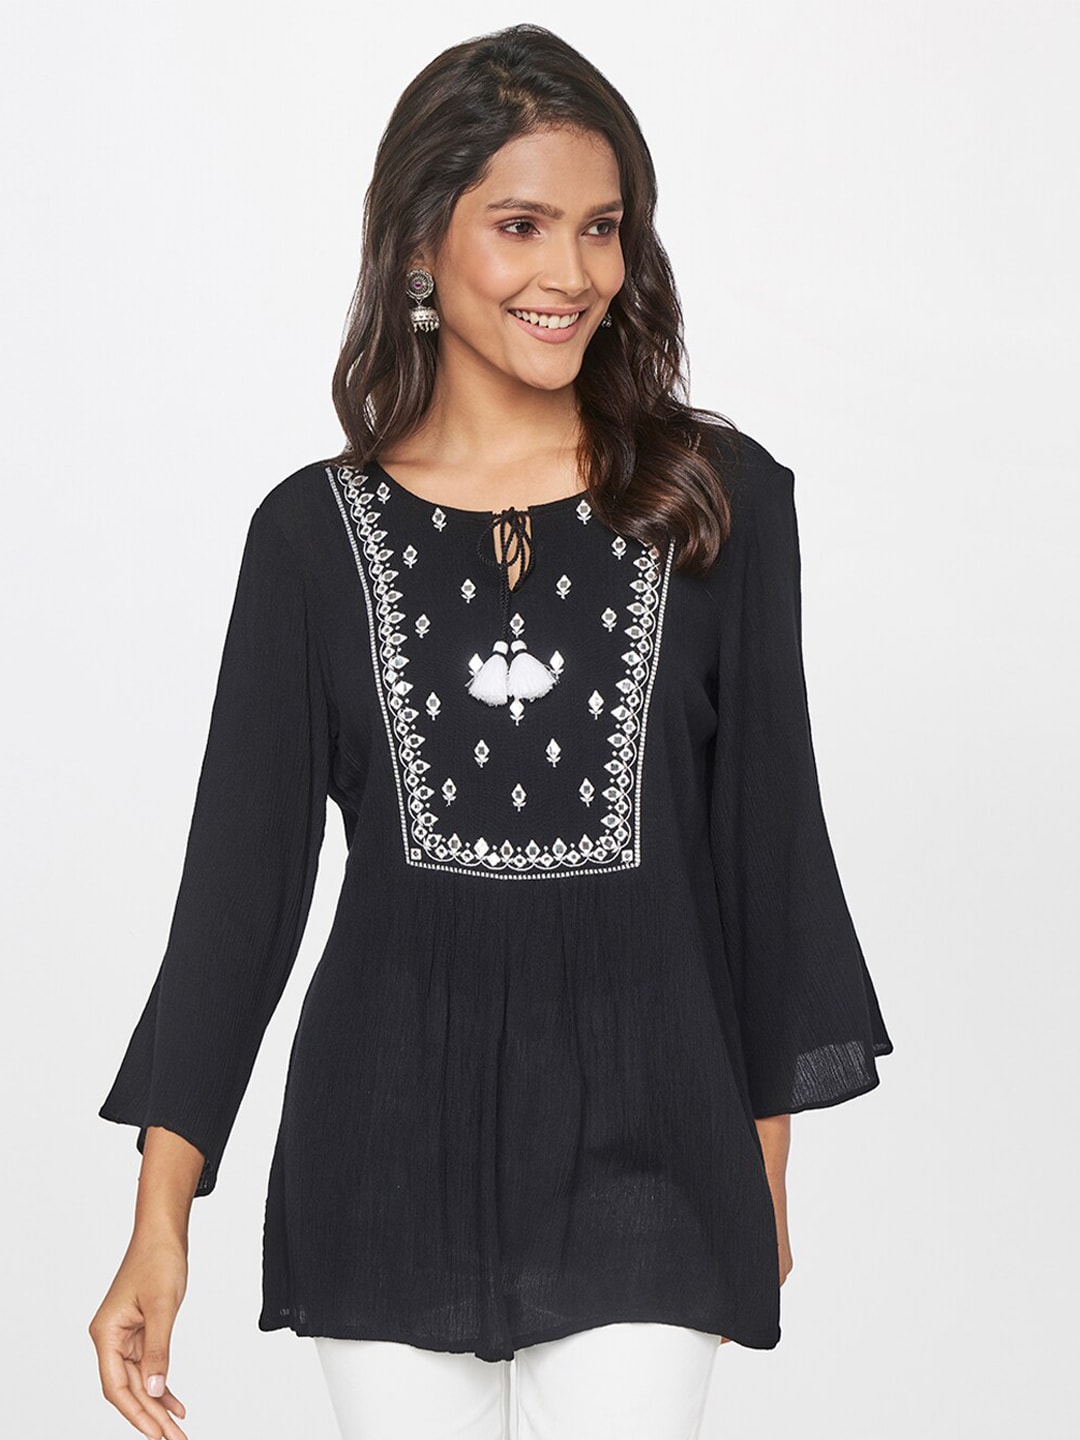 itse Black Floral Embellished Tie-Up Neck Top Price in India